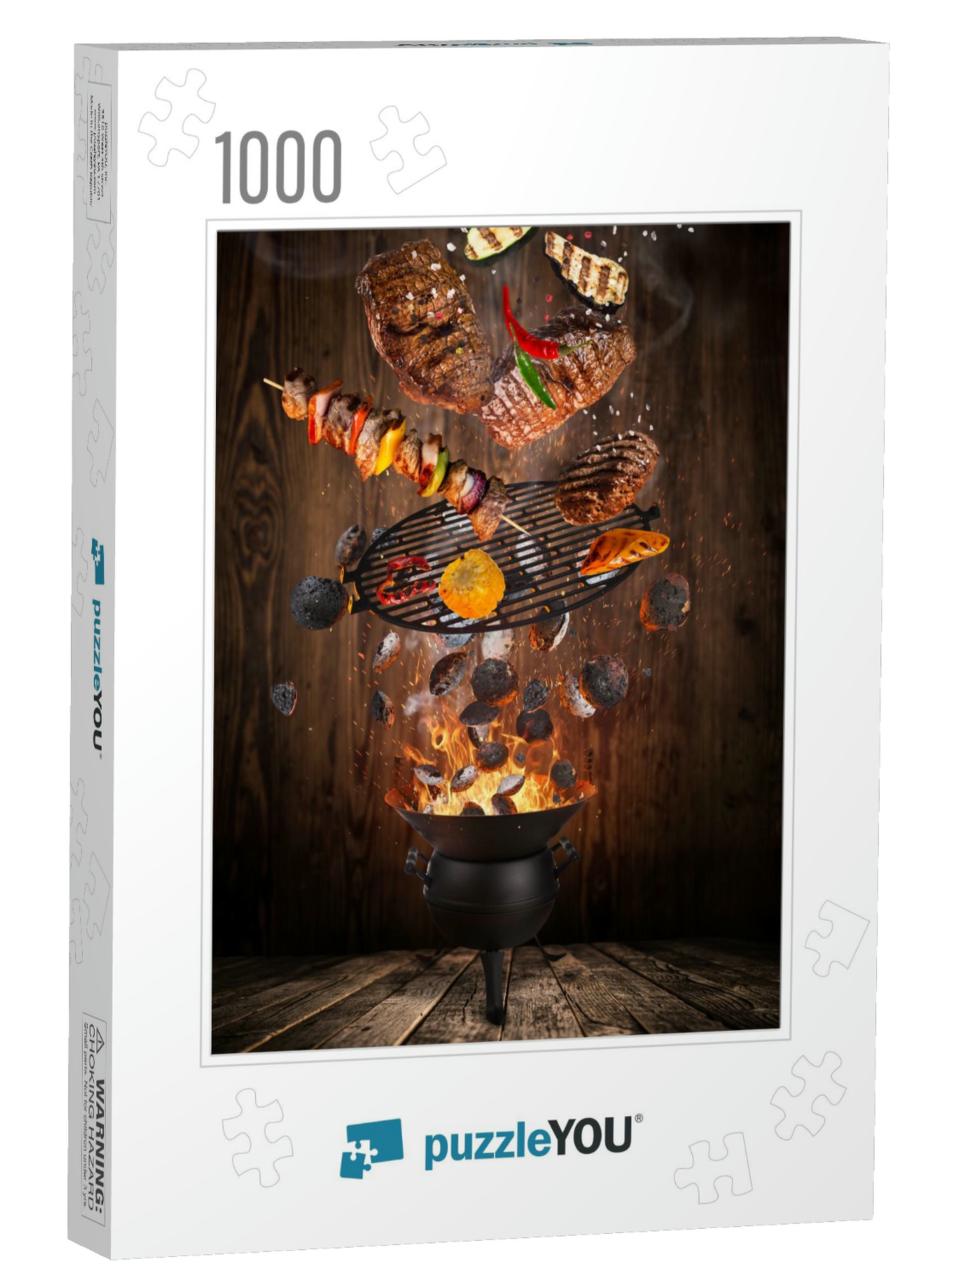 Kettle Grill with Hot Briquettes, Cast Iron Grate & Tasty... Jigsaw Puzzle with 1000 pieces